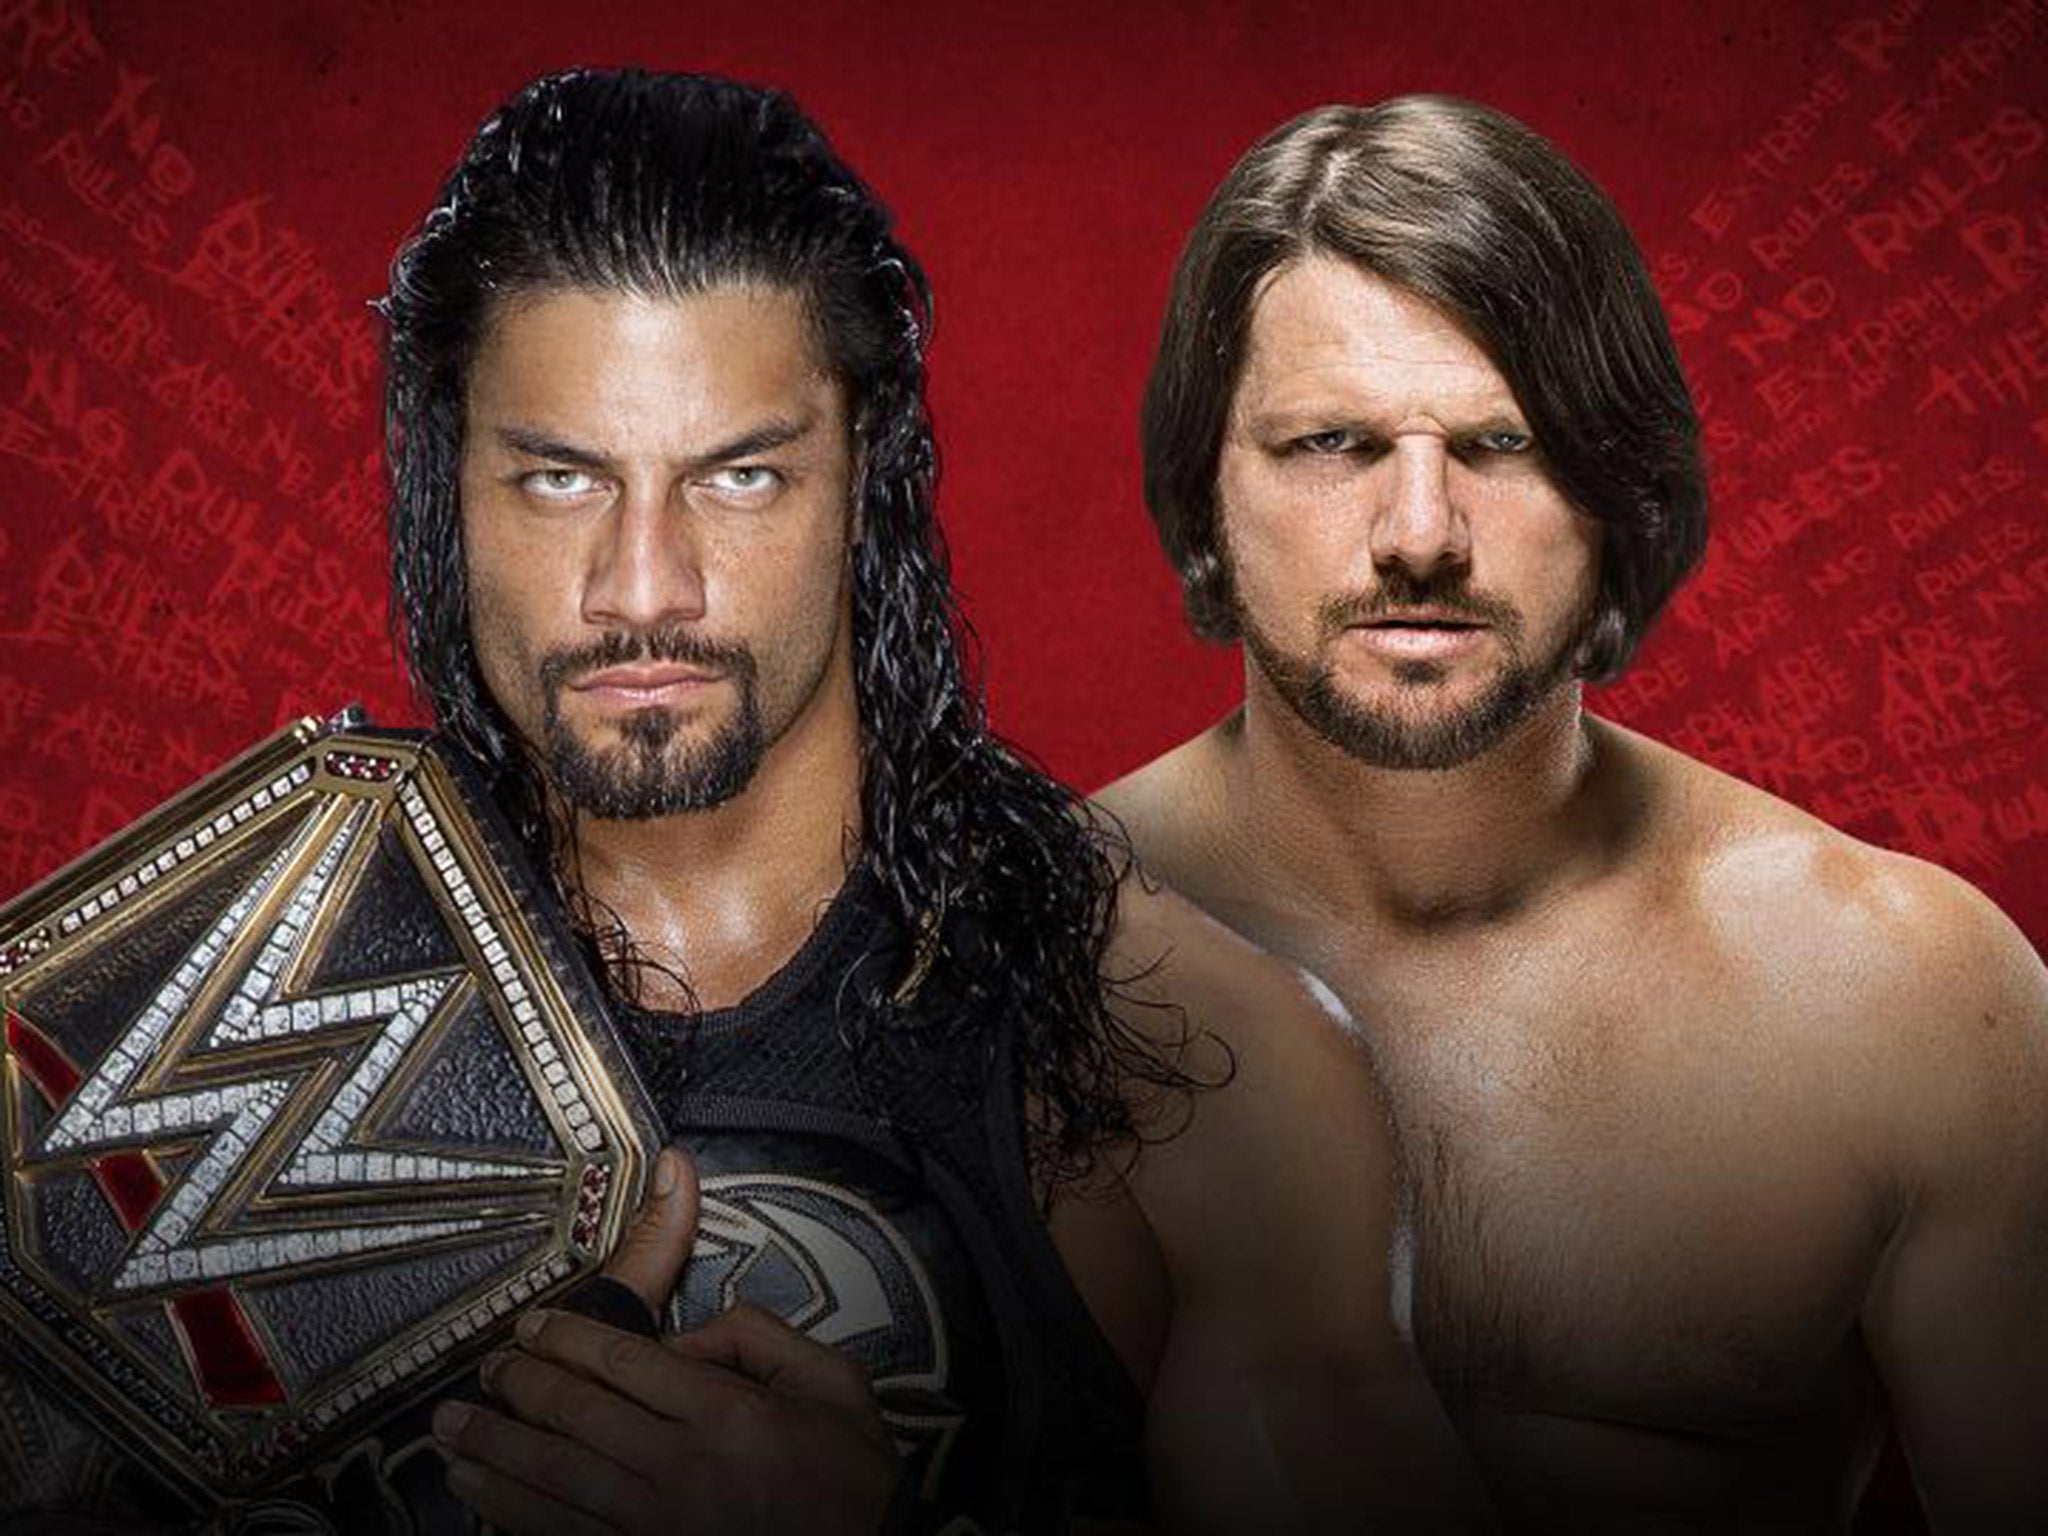 Roman Reigns and AJ Styles face off in an Extreme Rules match for the WWE World Heavyweight Championship